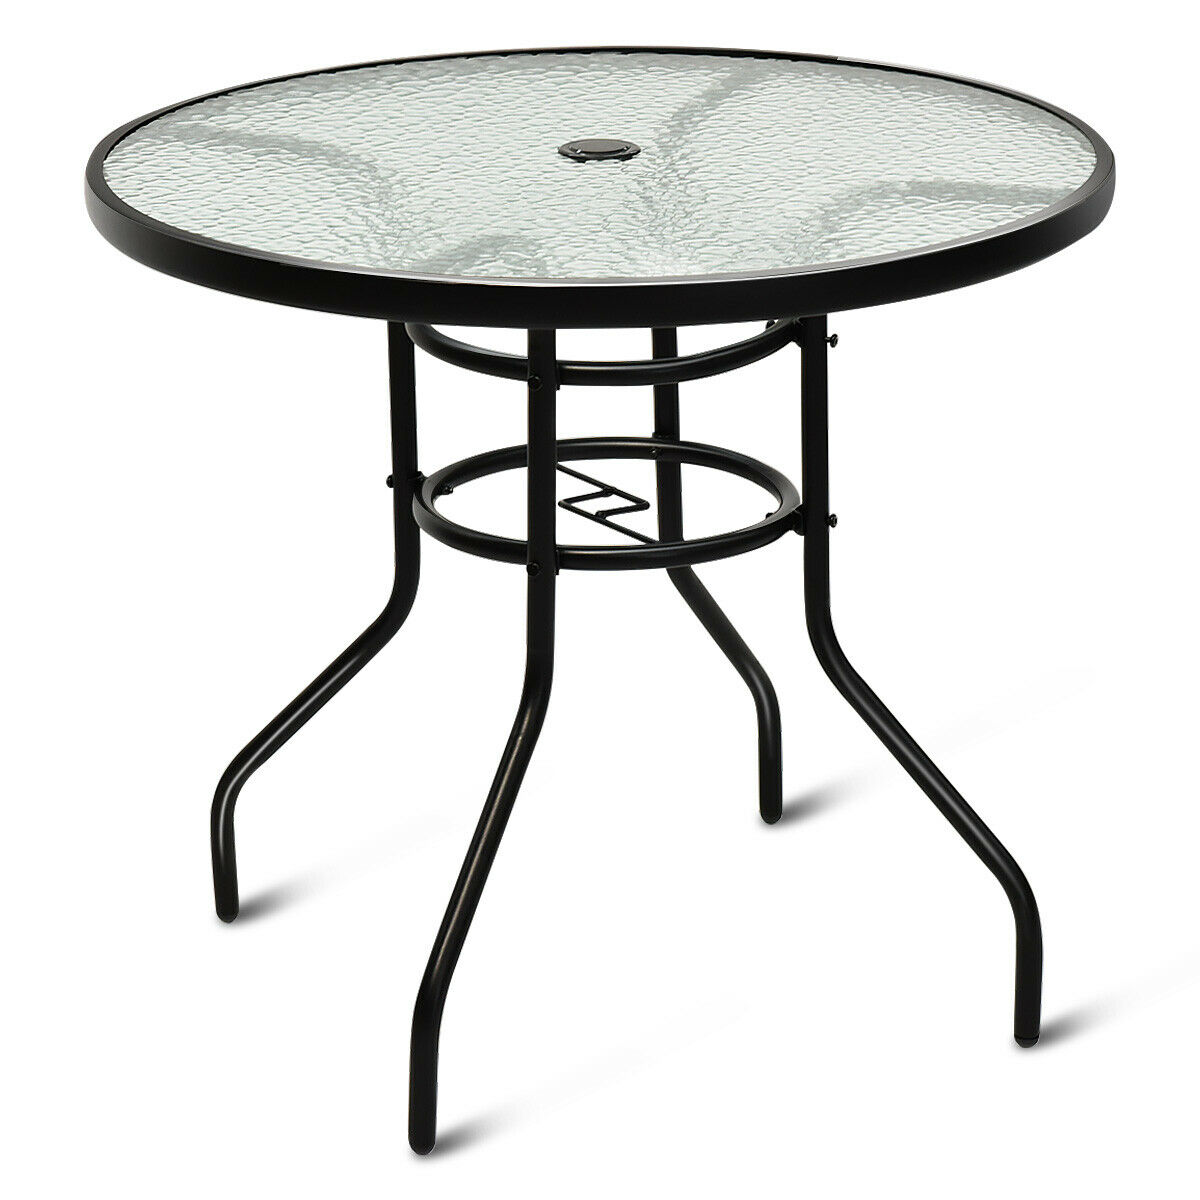 Costway 32'' Patio Round Table Tempered Glass Steel Frame Outdoor Pool Yard Garden - image 1 of 8